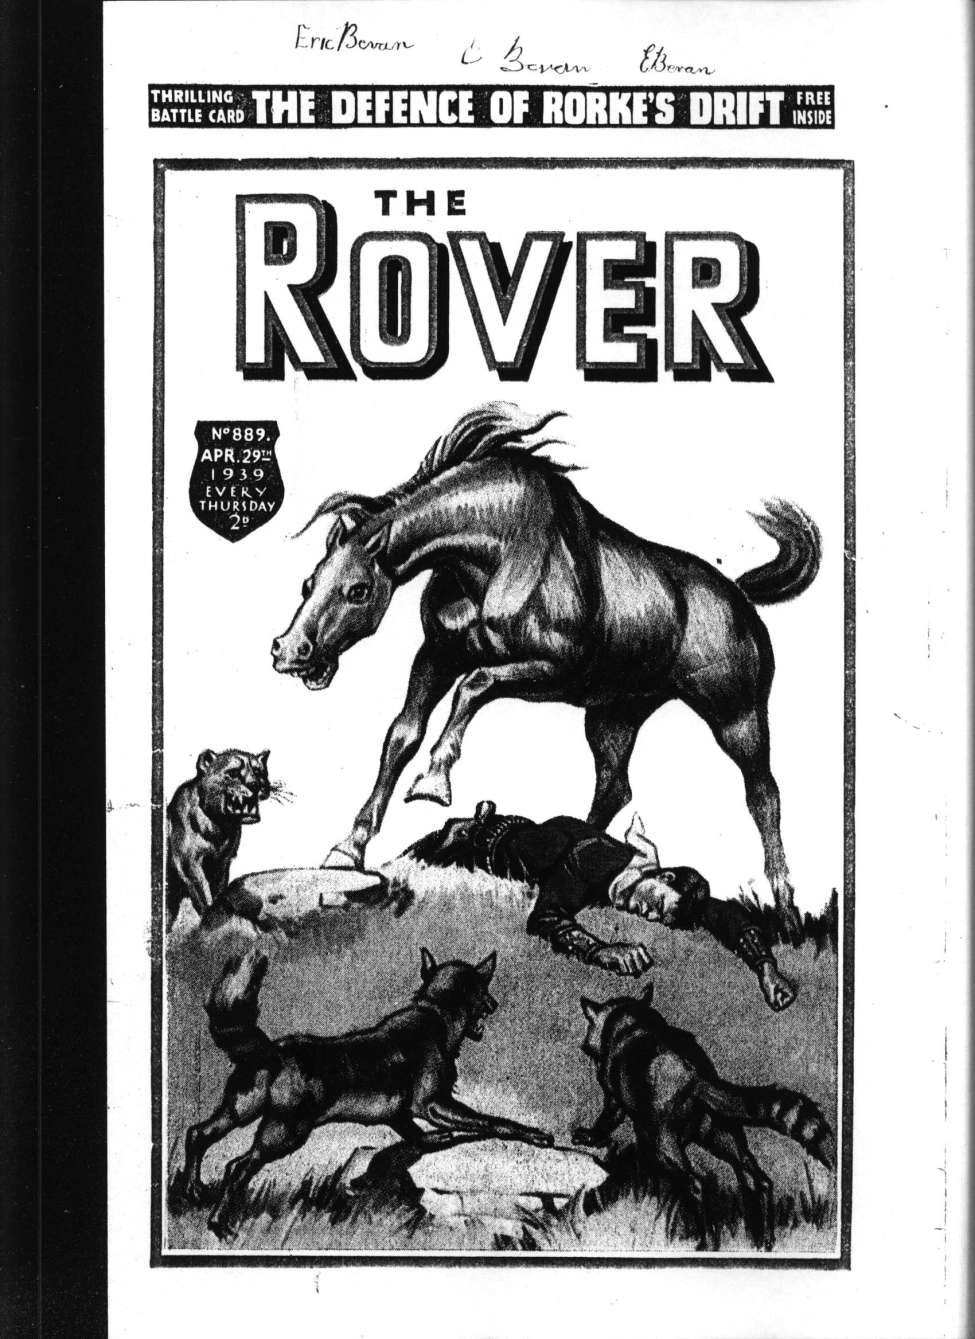 Book Cover For The Rover 889